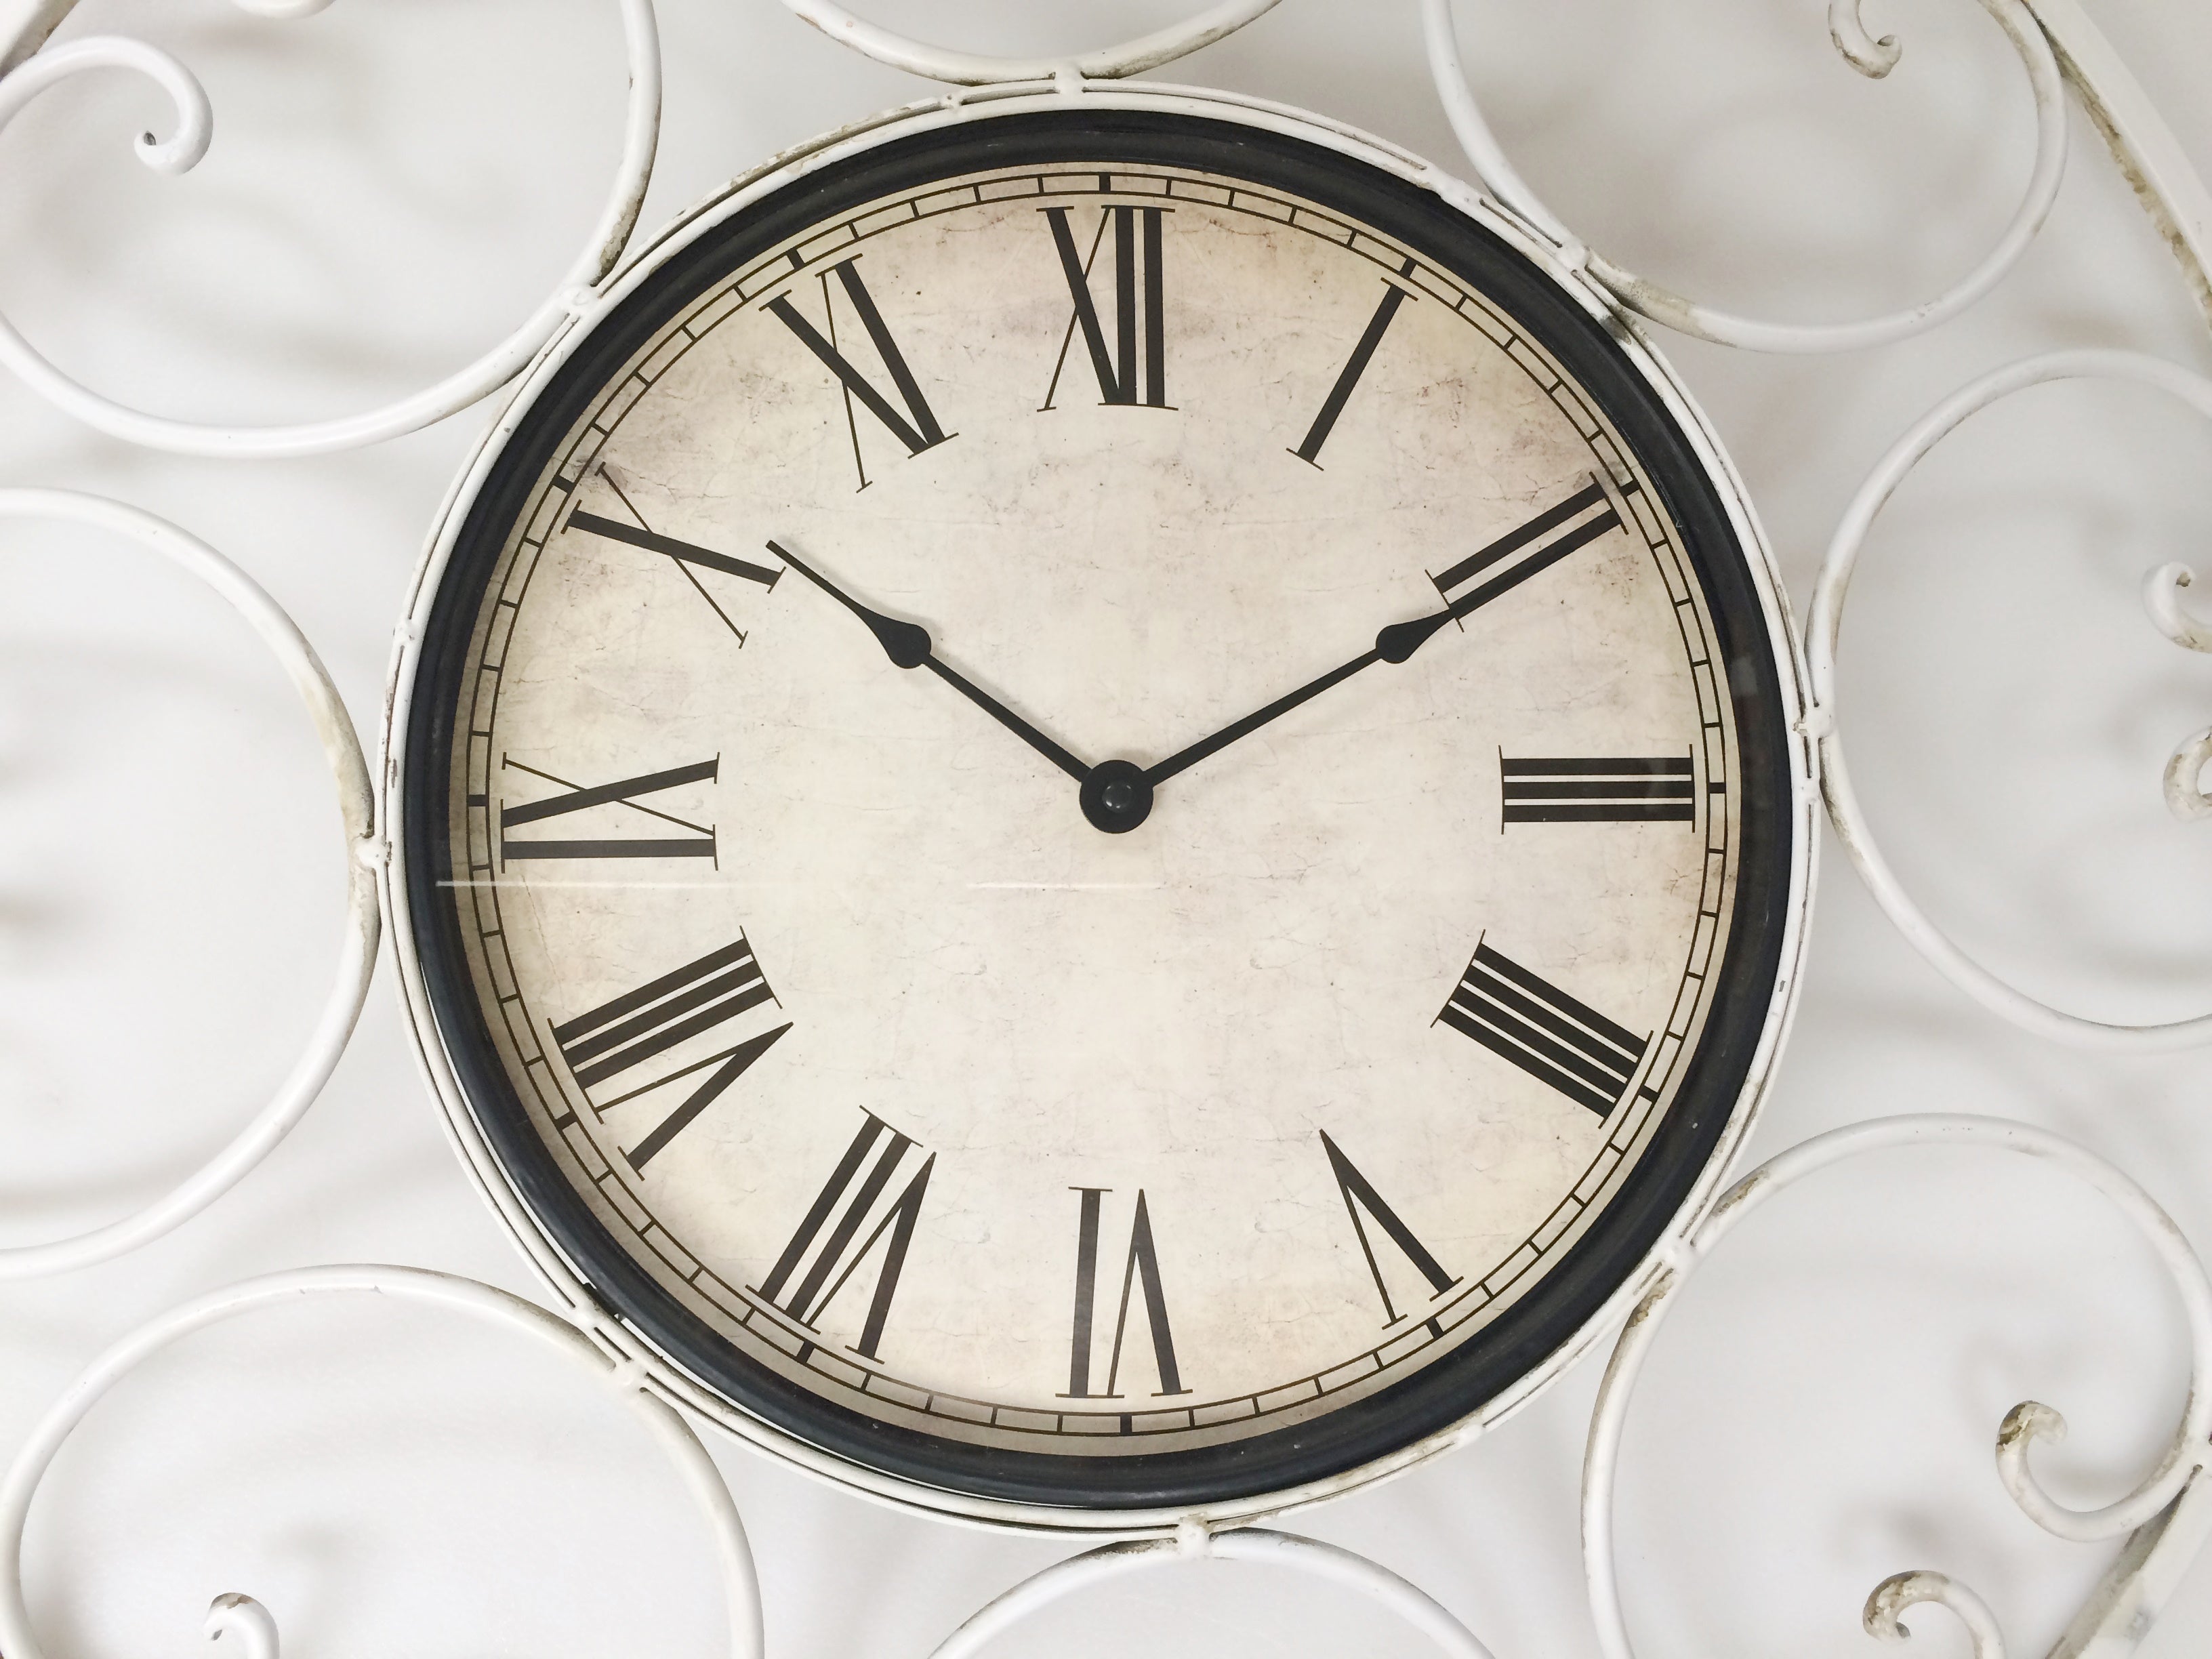 Vintage Shabby Chic White Battery Wall Clock | eXibit collection